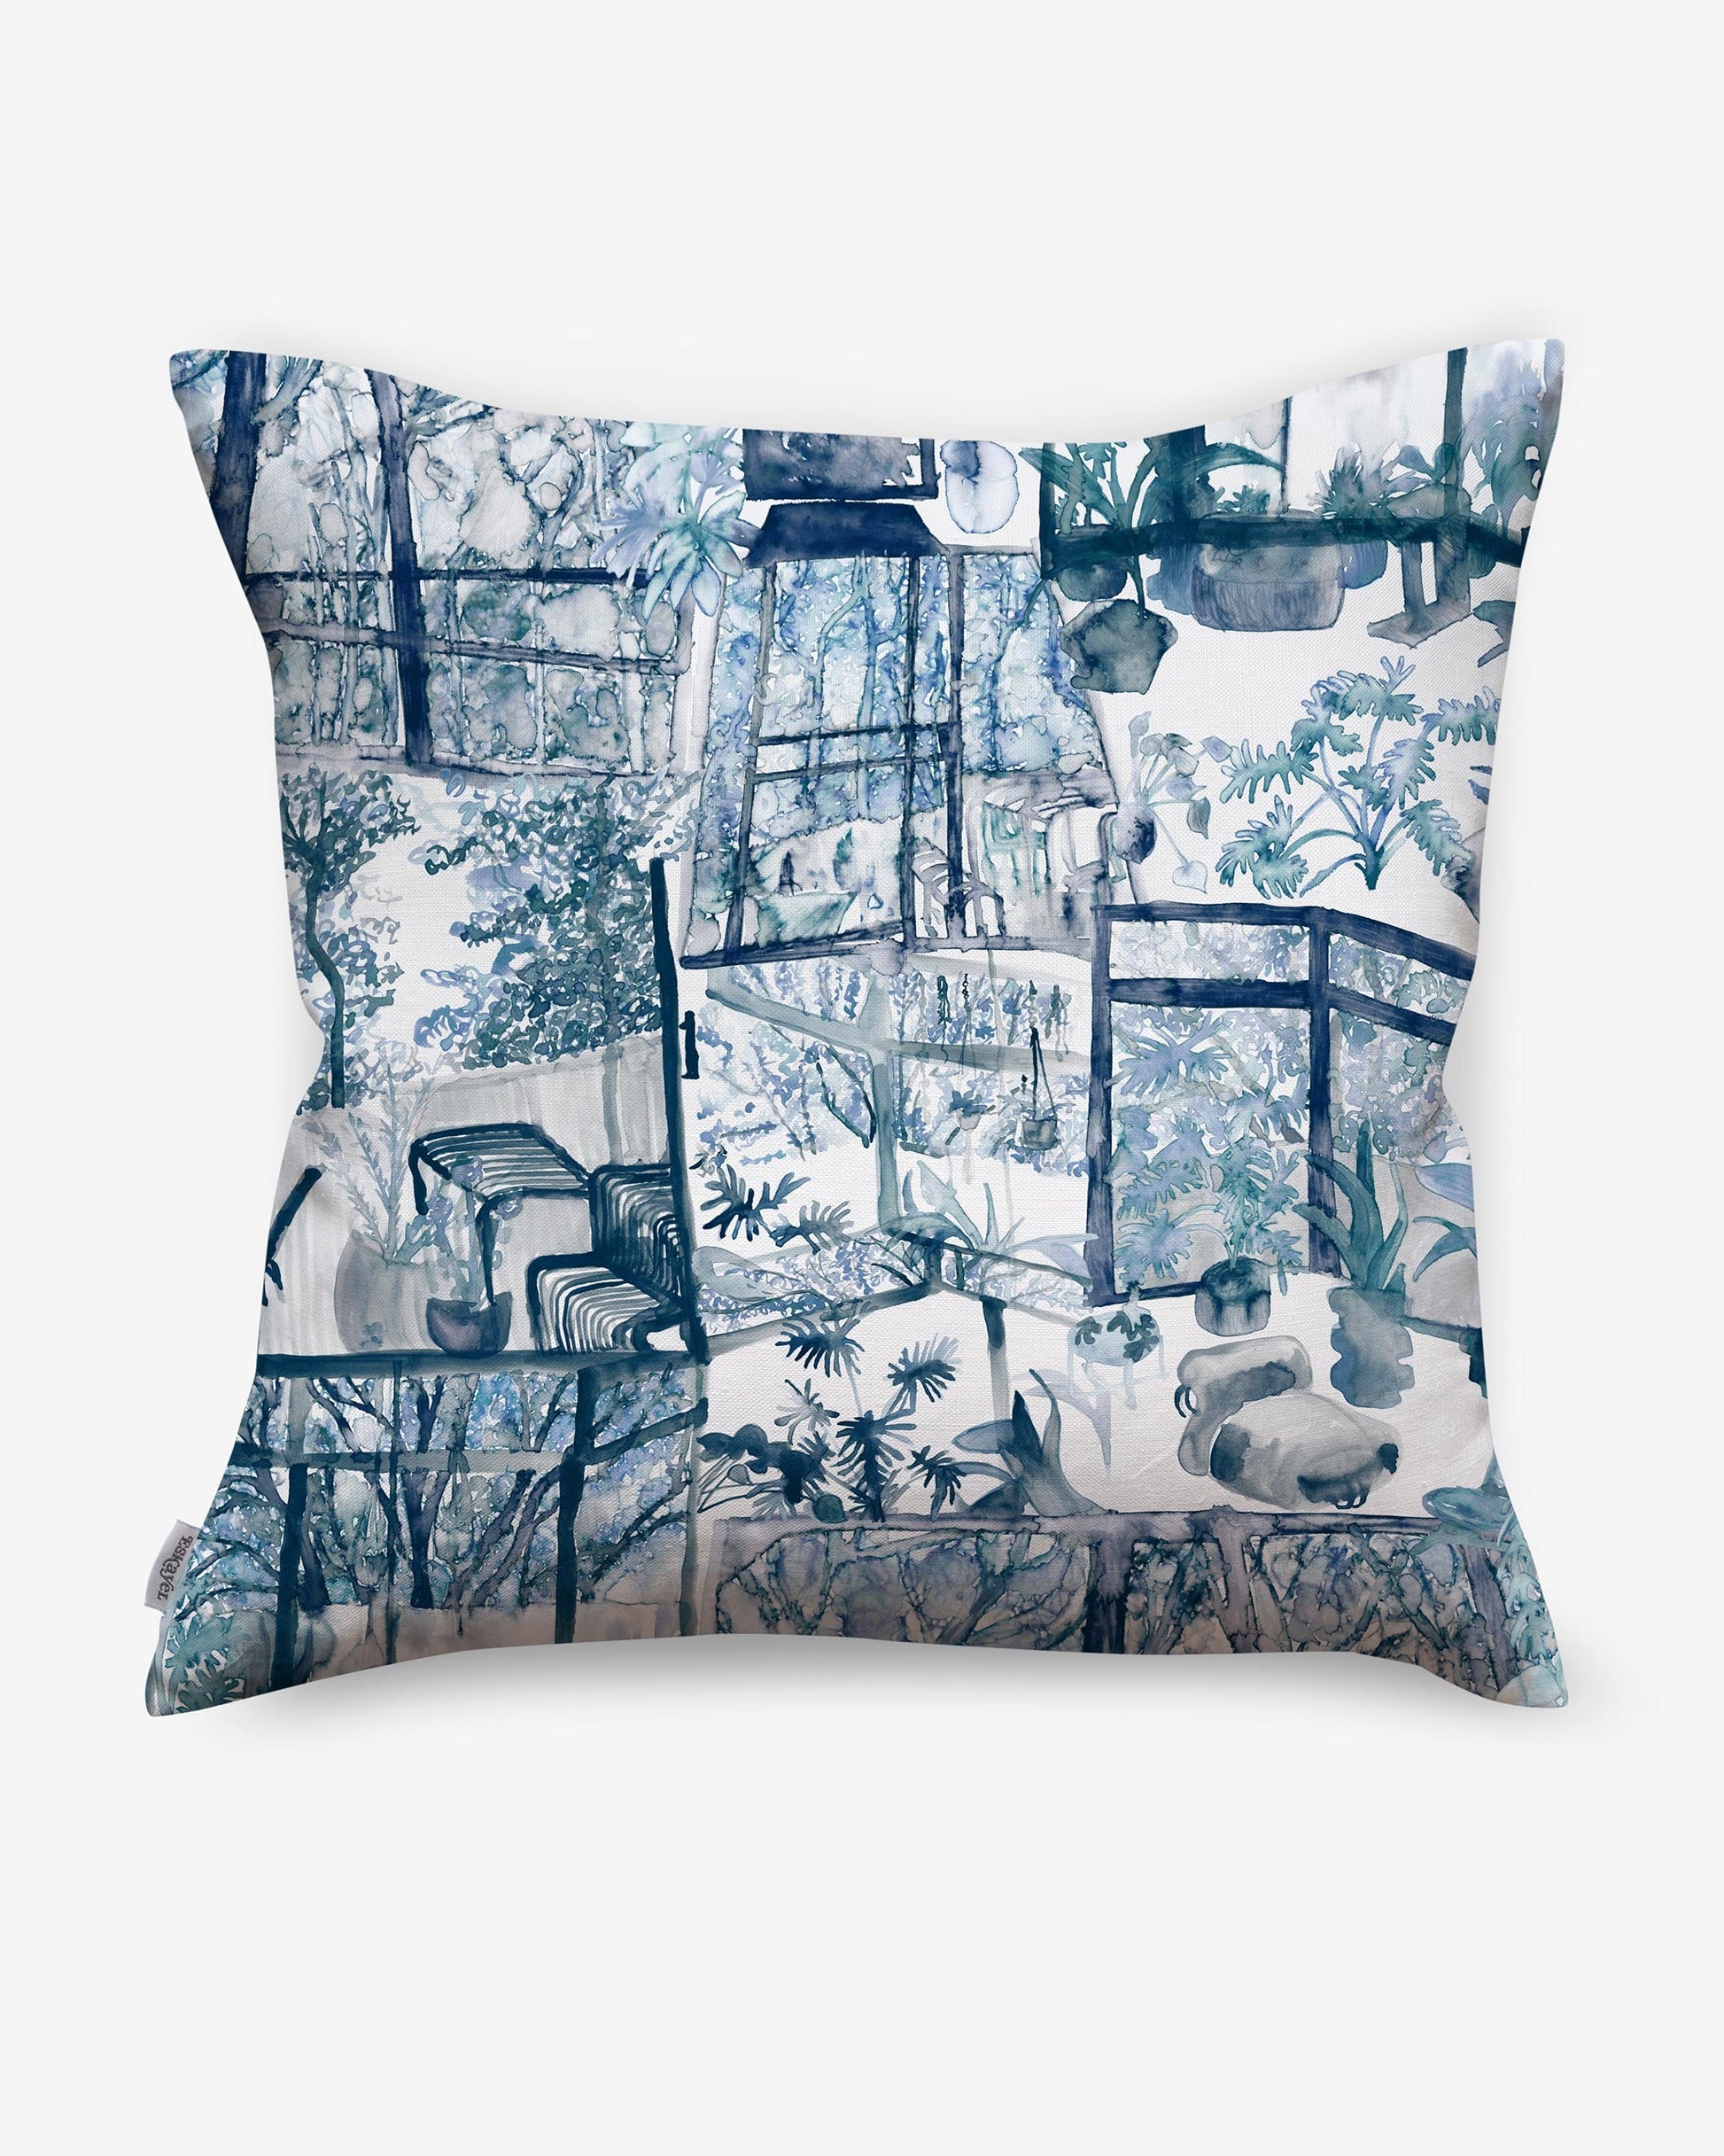 A blue and white Quotidiana Pillow Midnight, featuring images of trees and flowers